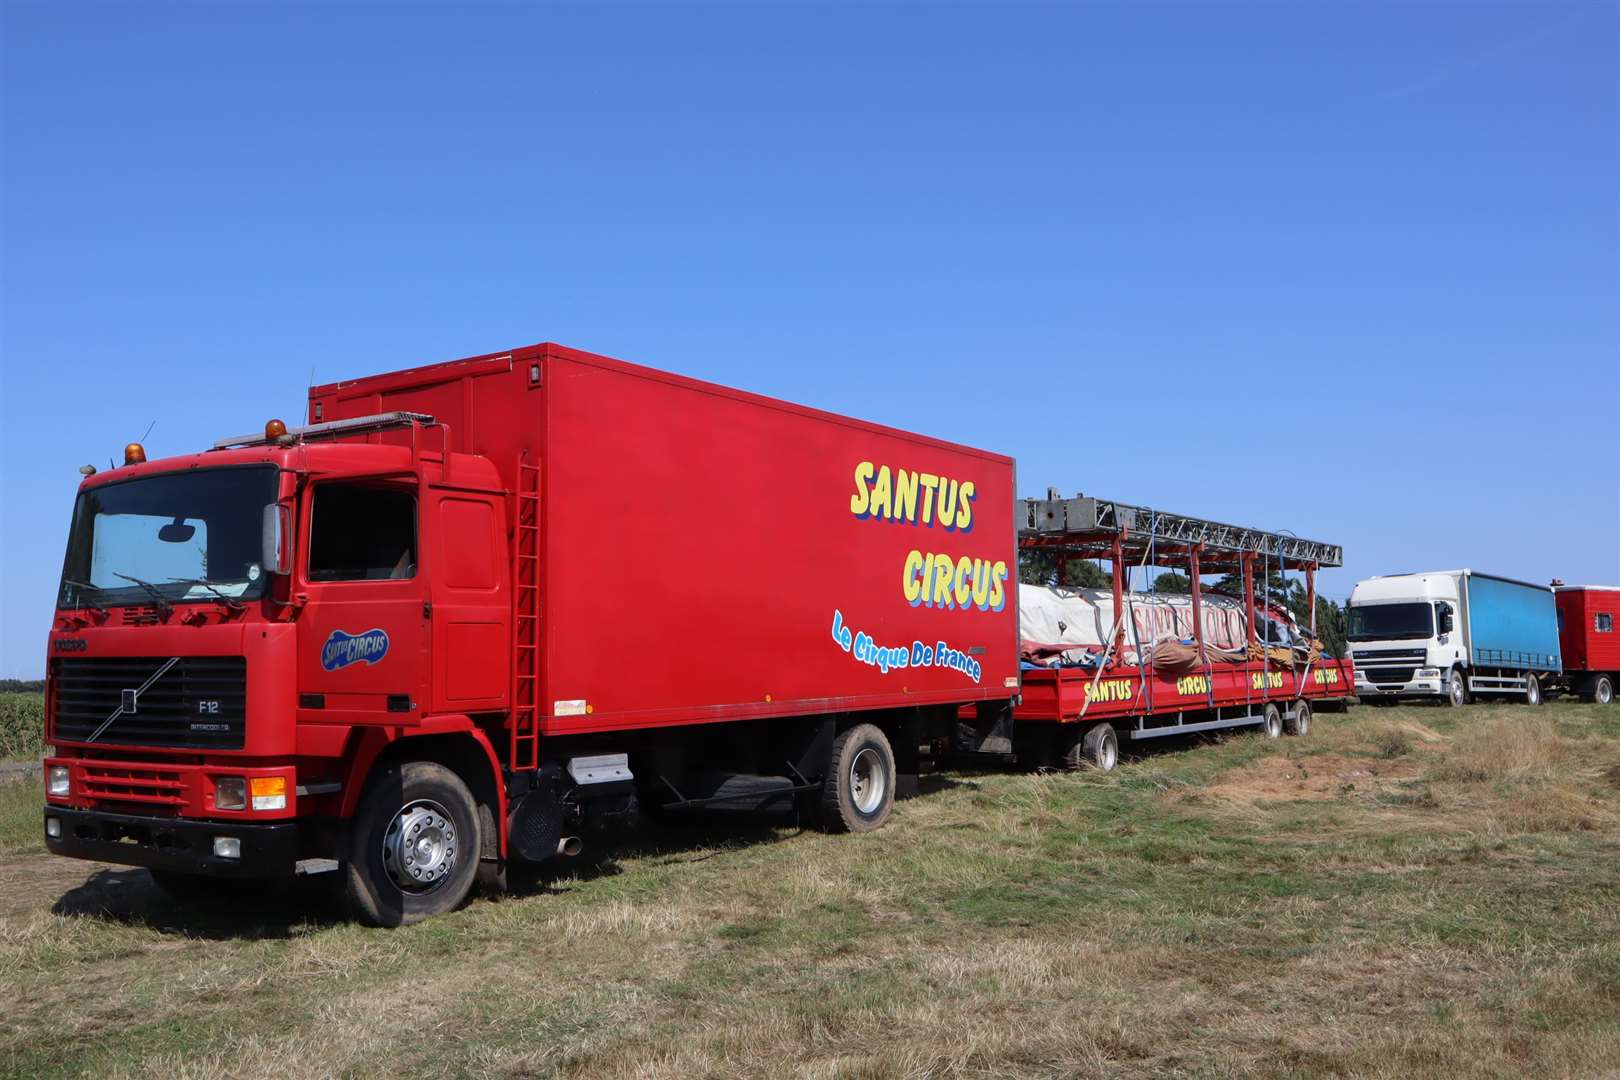 Looks like we have a convoy as Santus Circus gets back on the road at Bapchild, Sittingbourne